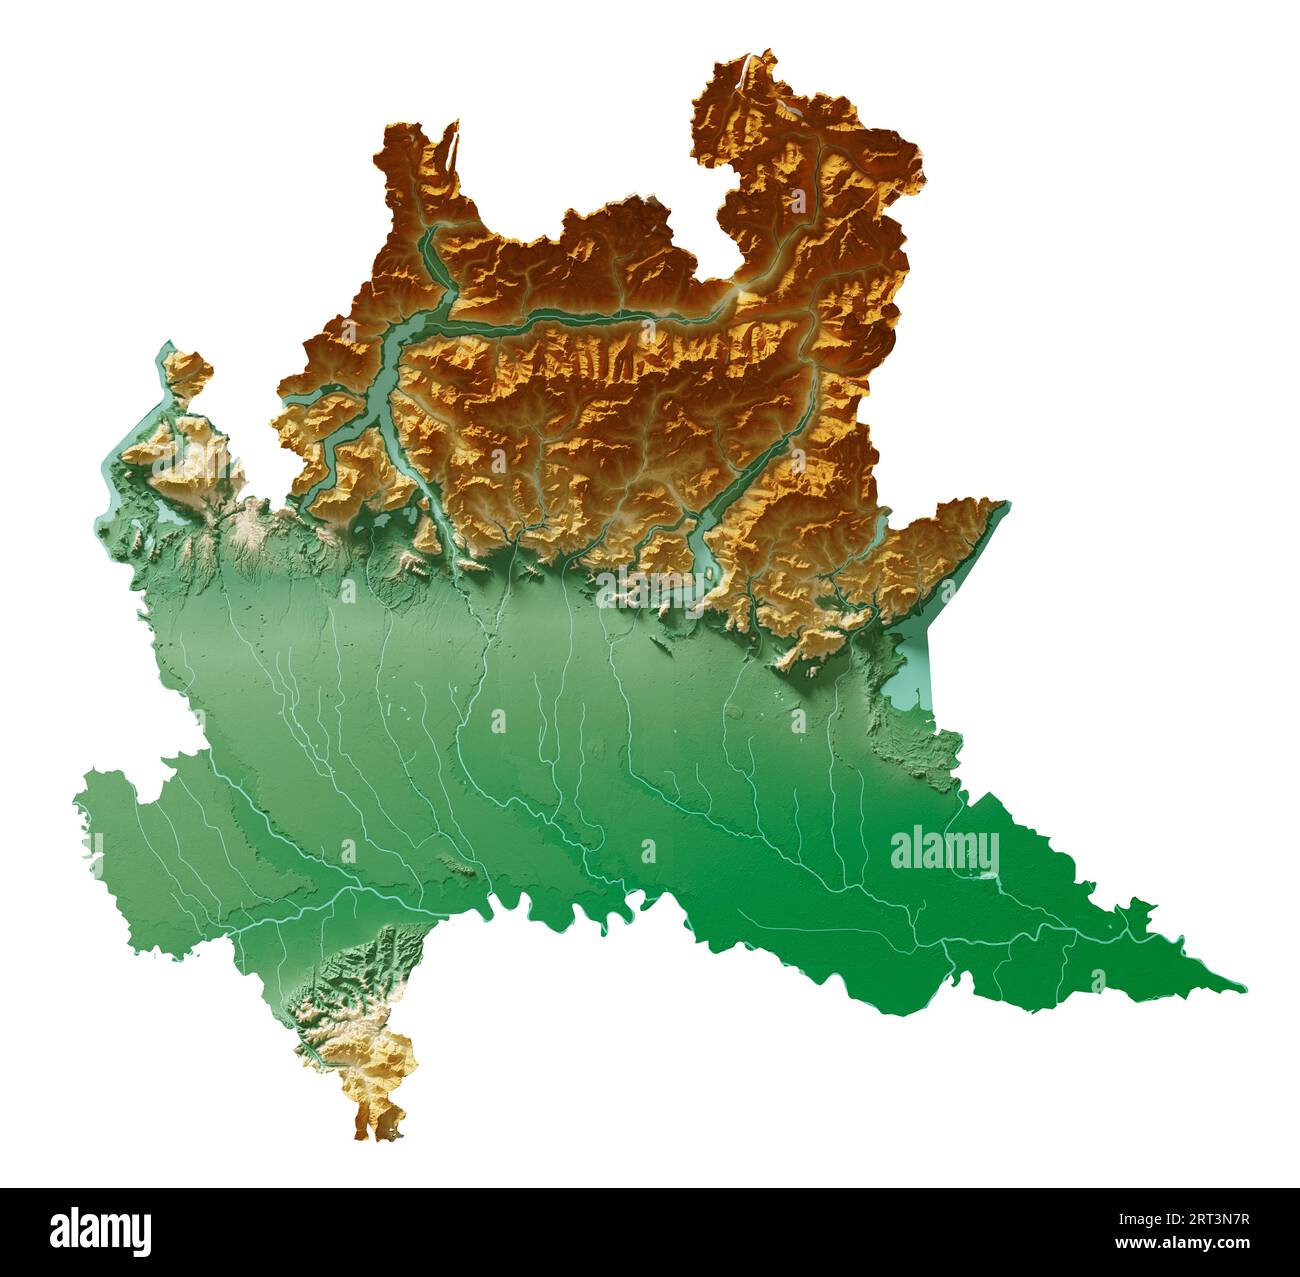 Lombardia (Lombardy). A region of Italy. Detailed 3D rendering of a shaded relief map, rivers, lakes. Colored by elevation. Pure white background. Stock Photo